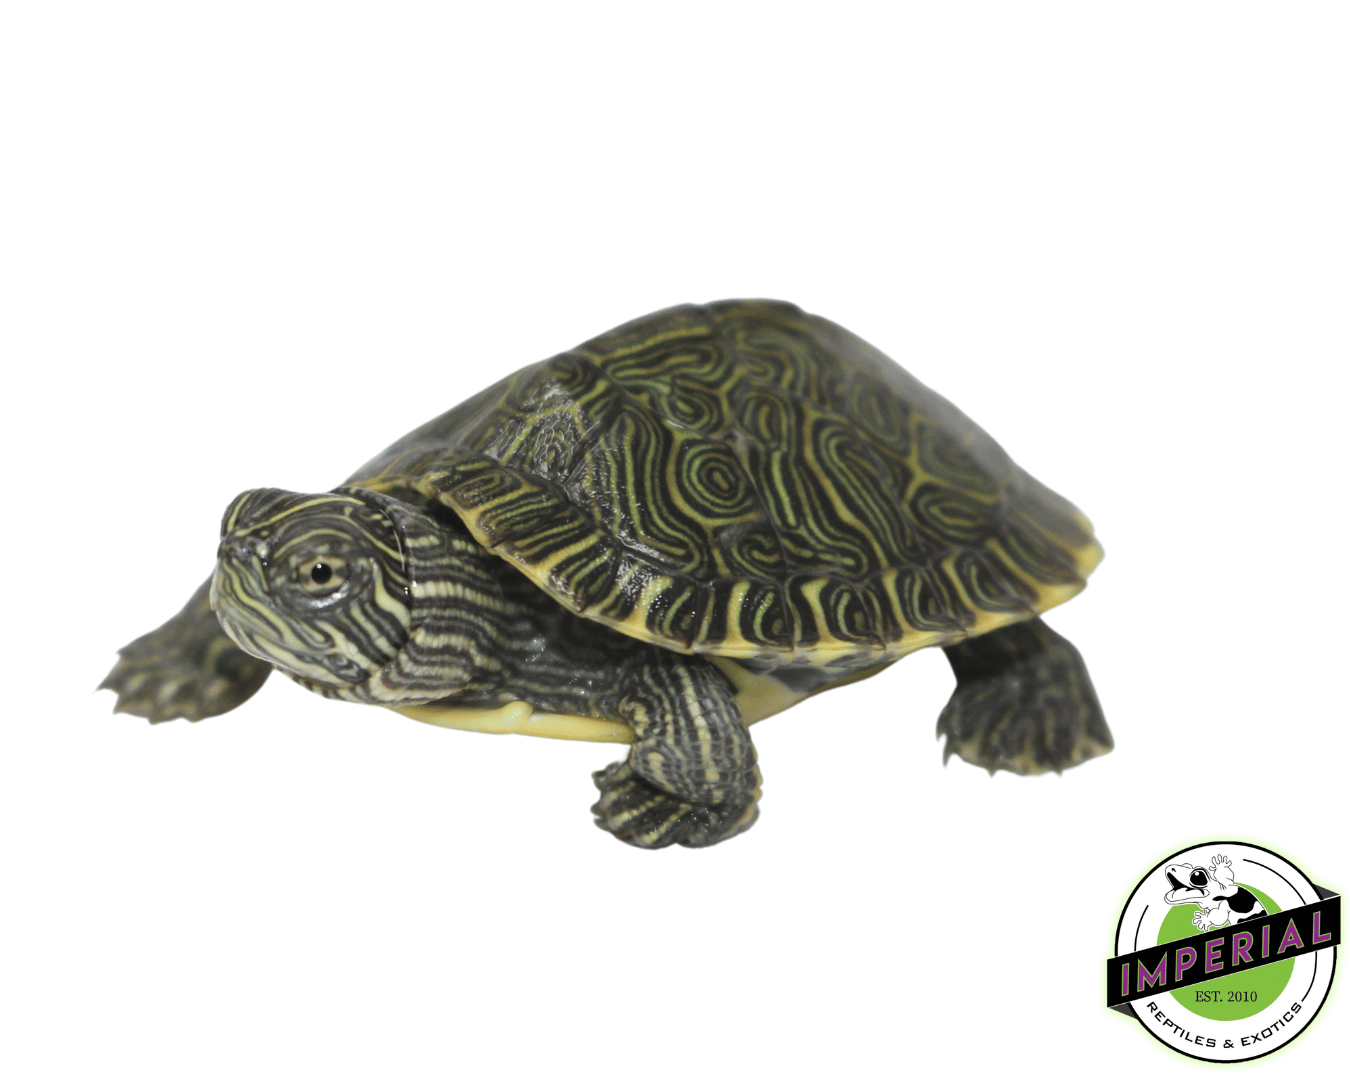 river cooter turtle for sale, buy reptiles online